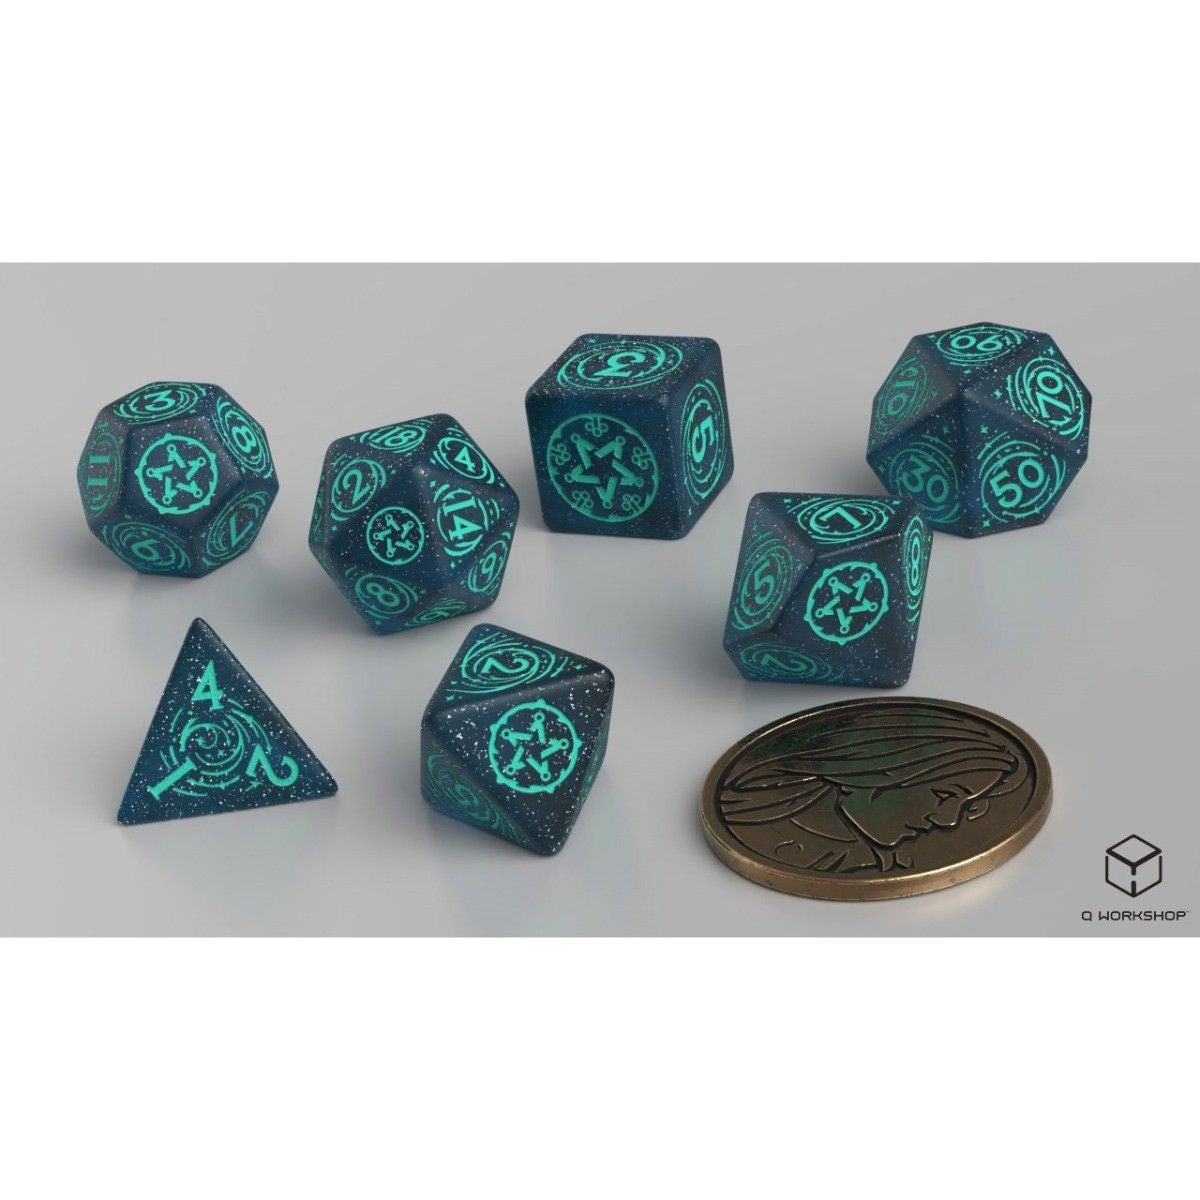 Q Workshop - The Witcher Dice Yennefer - Sorceress Supreme Dice Set with Coin